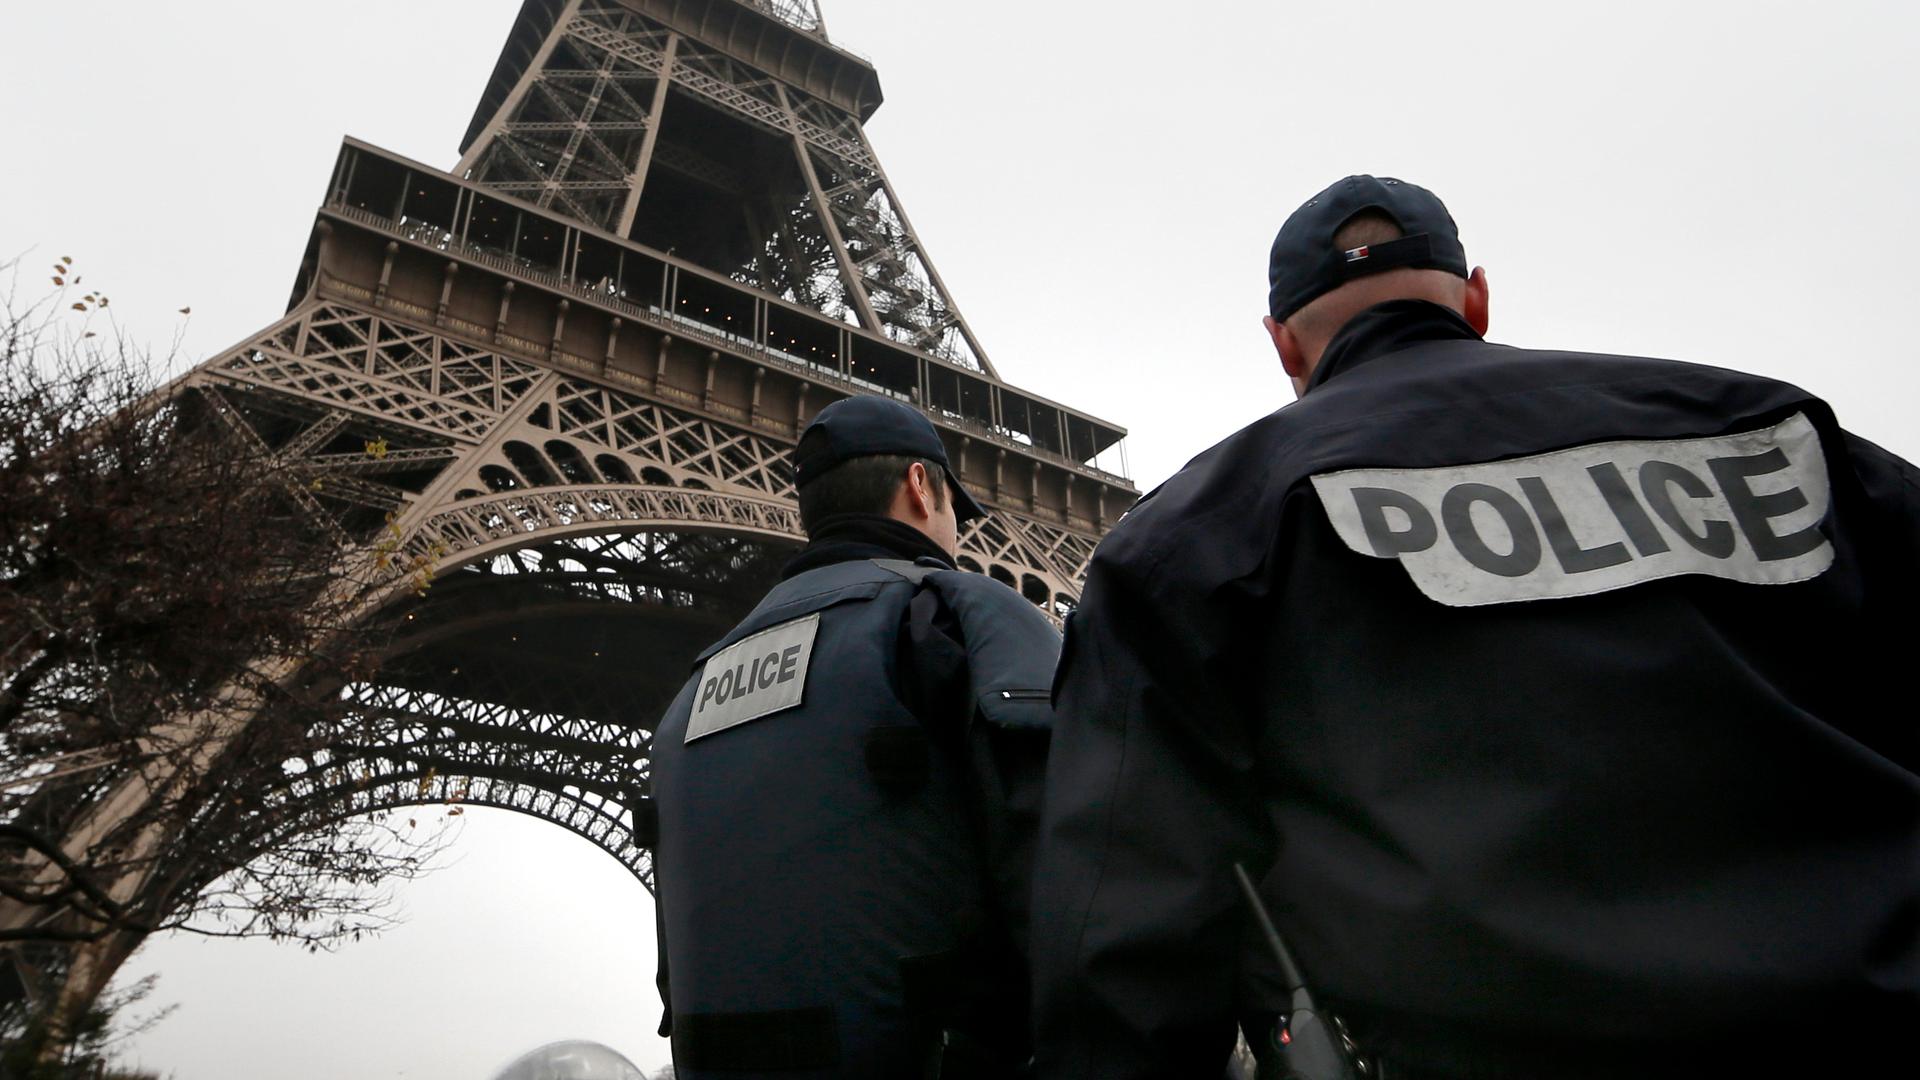 French police patrol near the Eiffel Tower in Paris as part of the highest level of "Vigipirate" security plan after a shooting at the Paris offices of Charlie Hebdo on January 7, 2015.